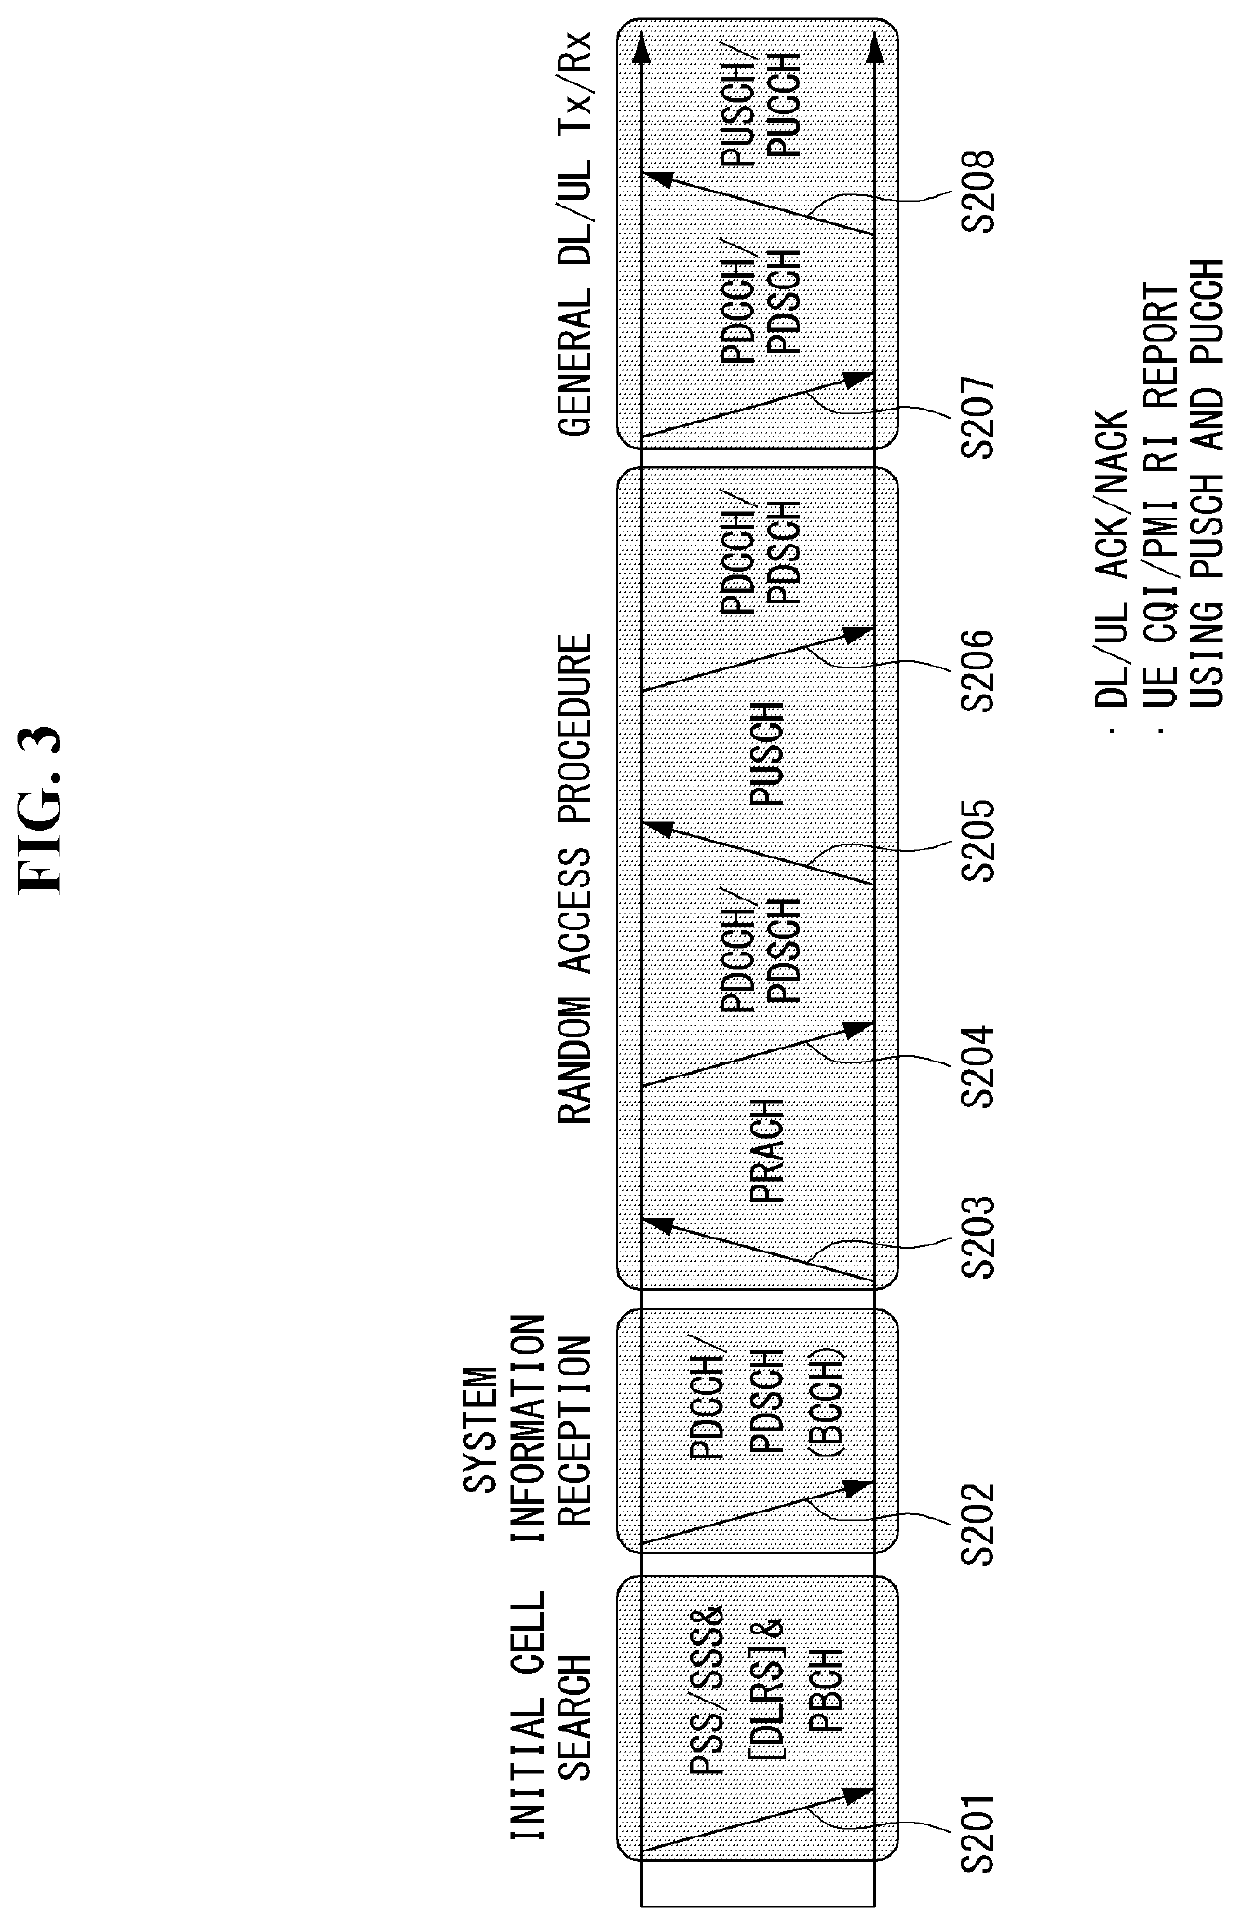 Artificially intelligent computing device and refrigerator control method using the same